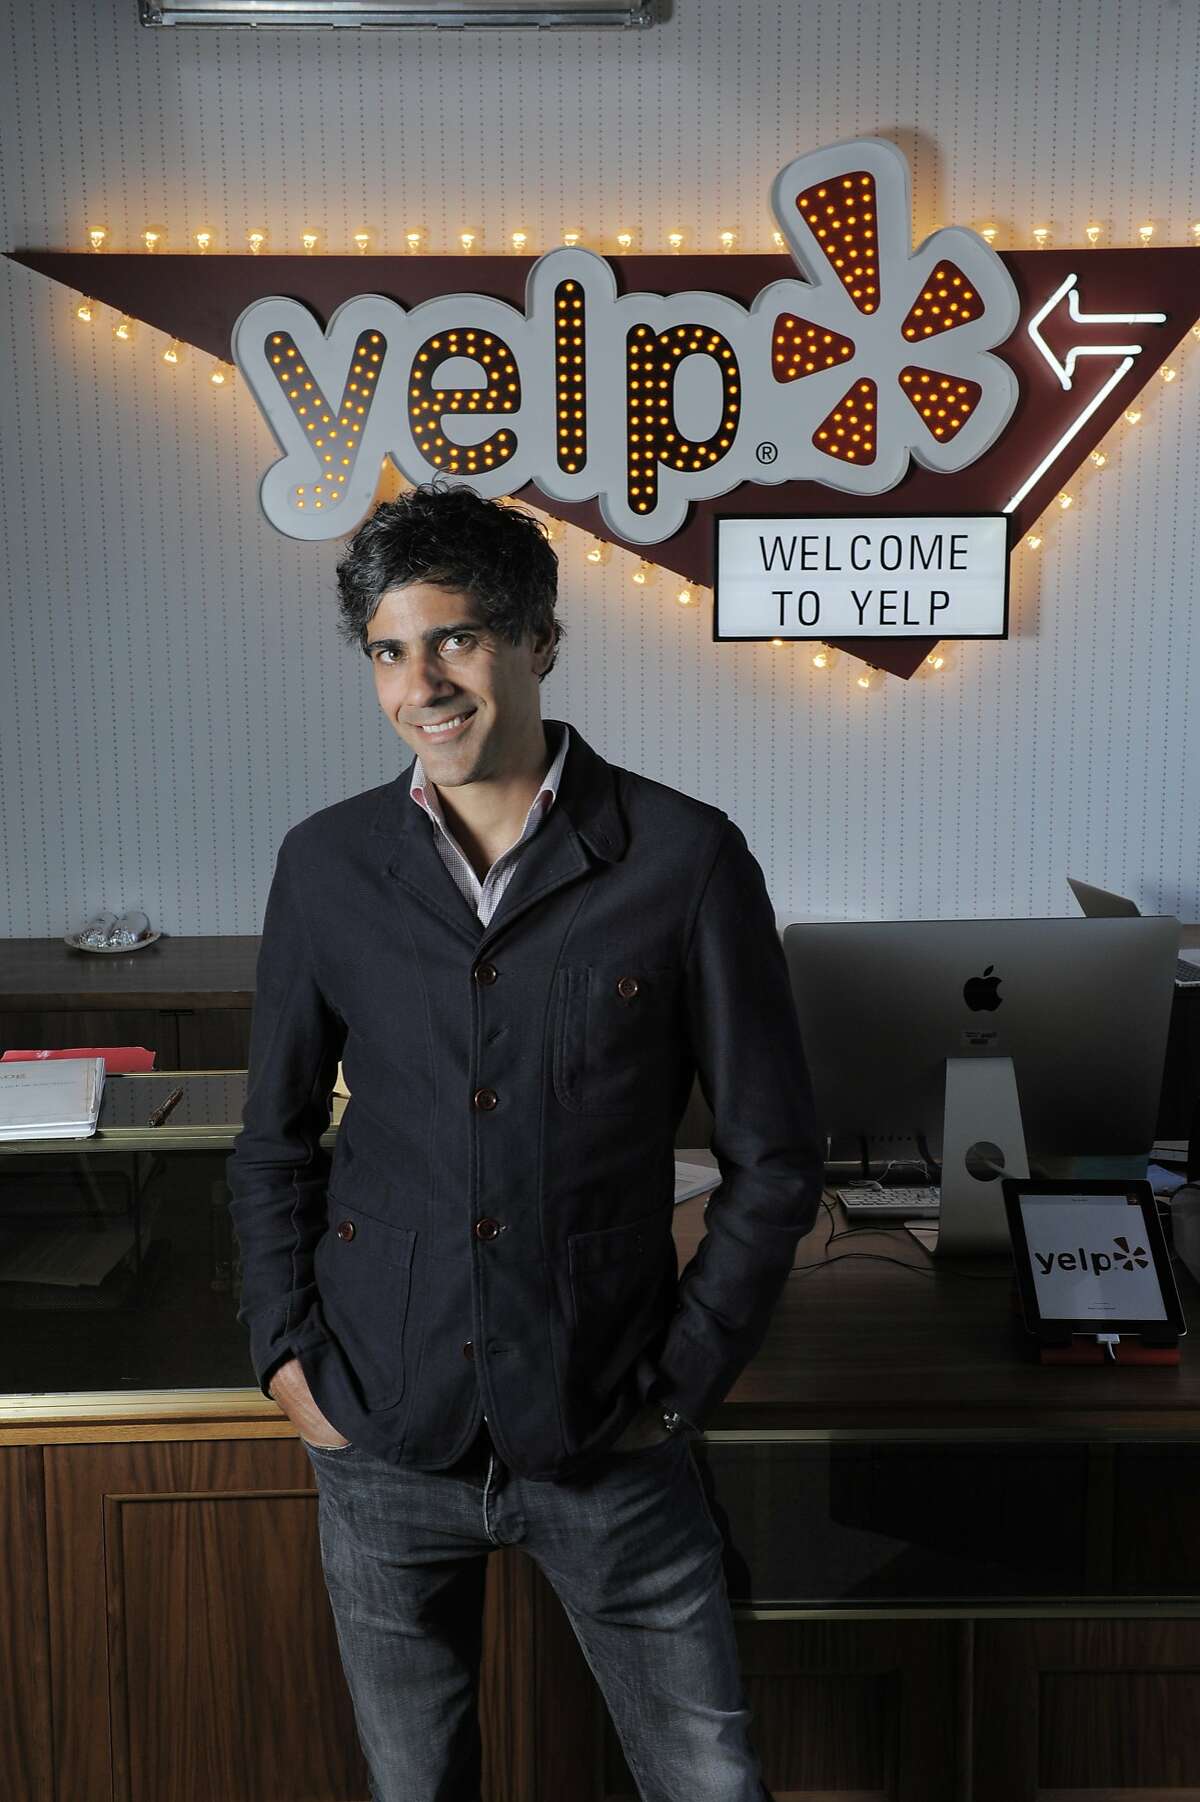 Yelp CEO and co-founder Jeremy Stoppelman poses for a portrait at Yelp headquarters on July 29, 2014 in San Francisco, CA. Yelp turns 10 years old during the Aug. 3 weekend.